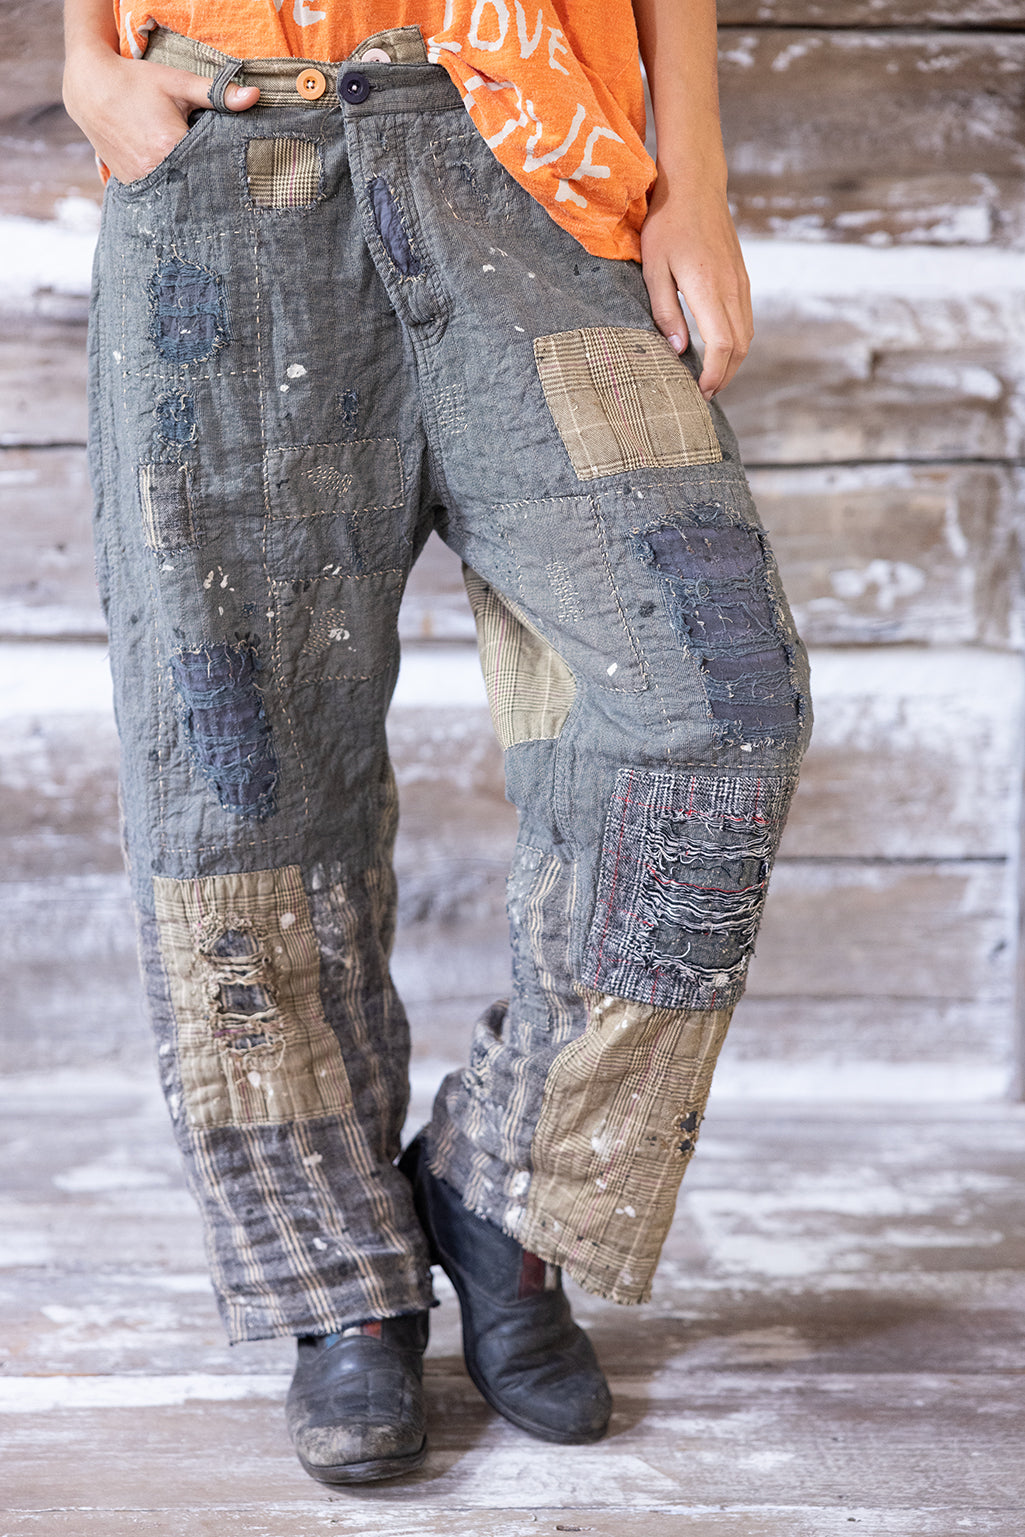 Quilted Miner Pants